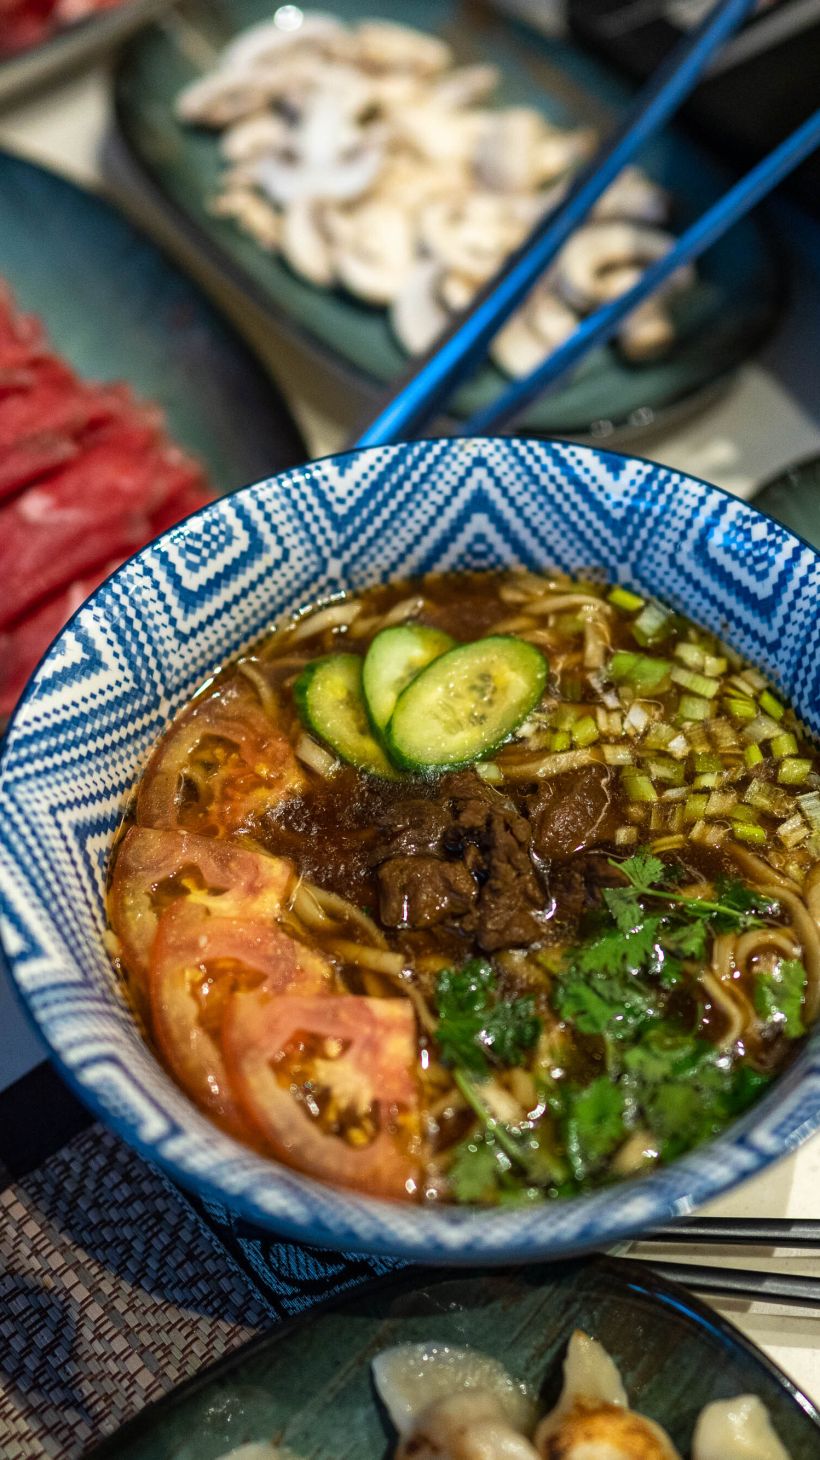 Overhead shot of a bowl of noodle soup topped with veggies and herbs and stir-fried beef